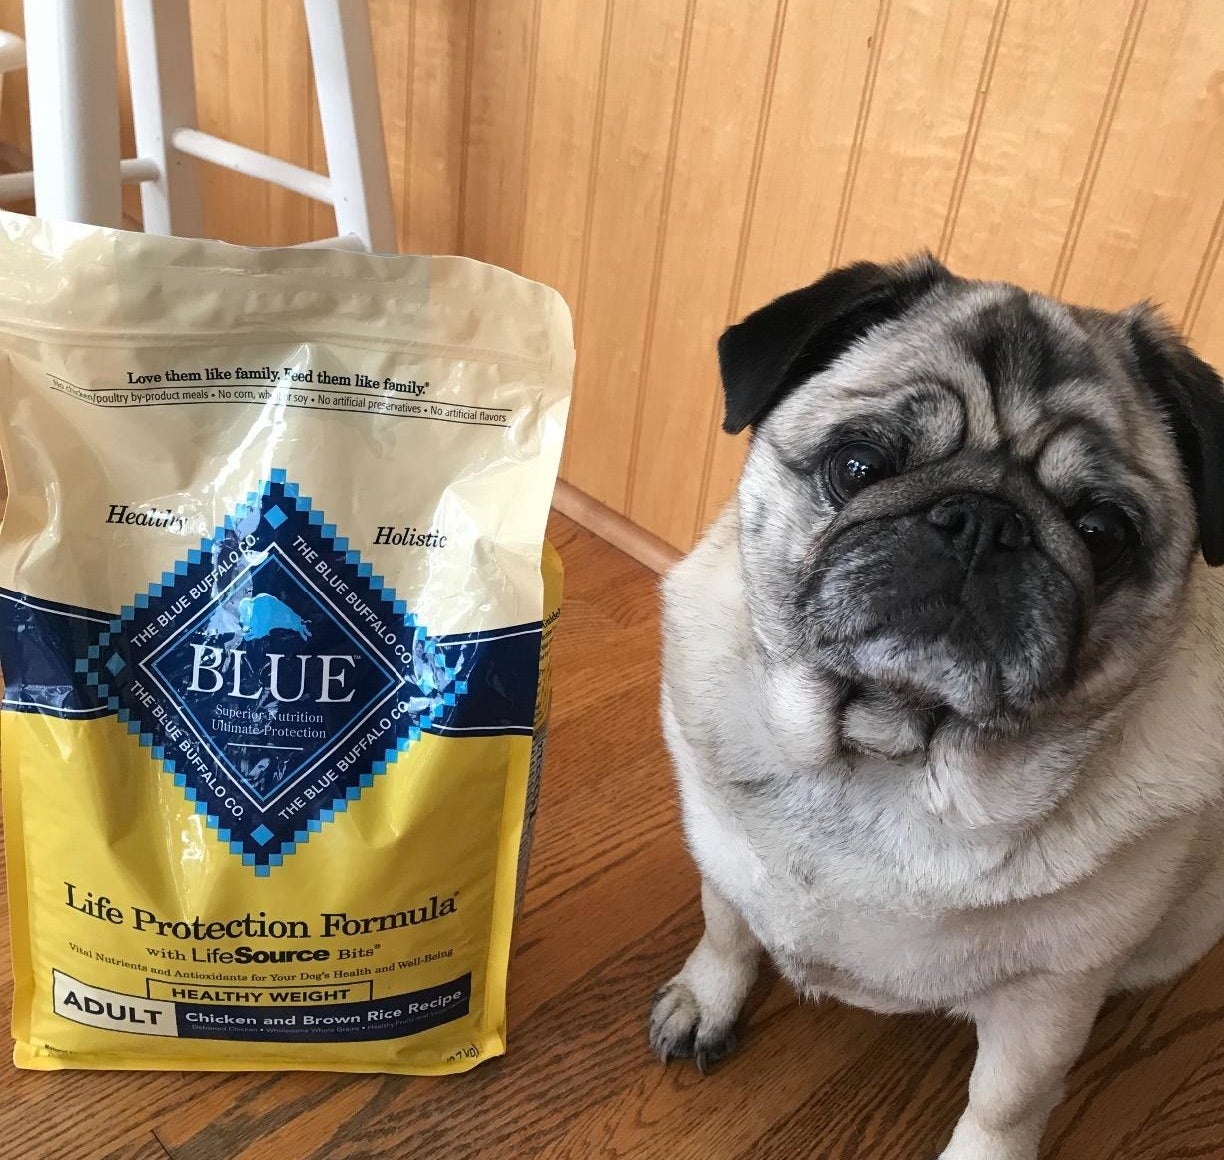 reviewer photo of pug next to the bag of food